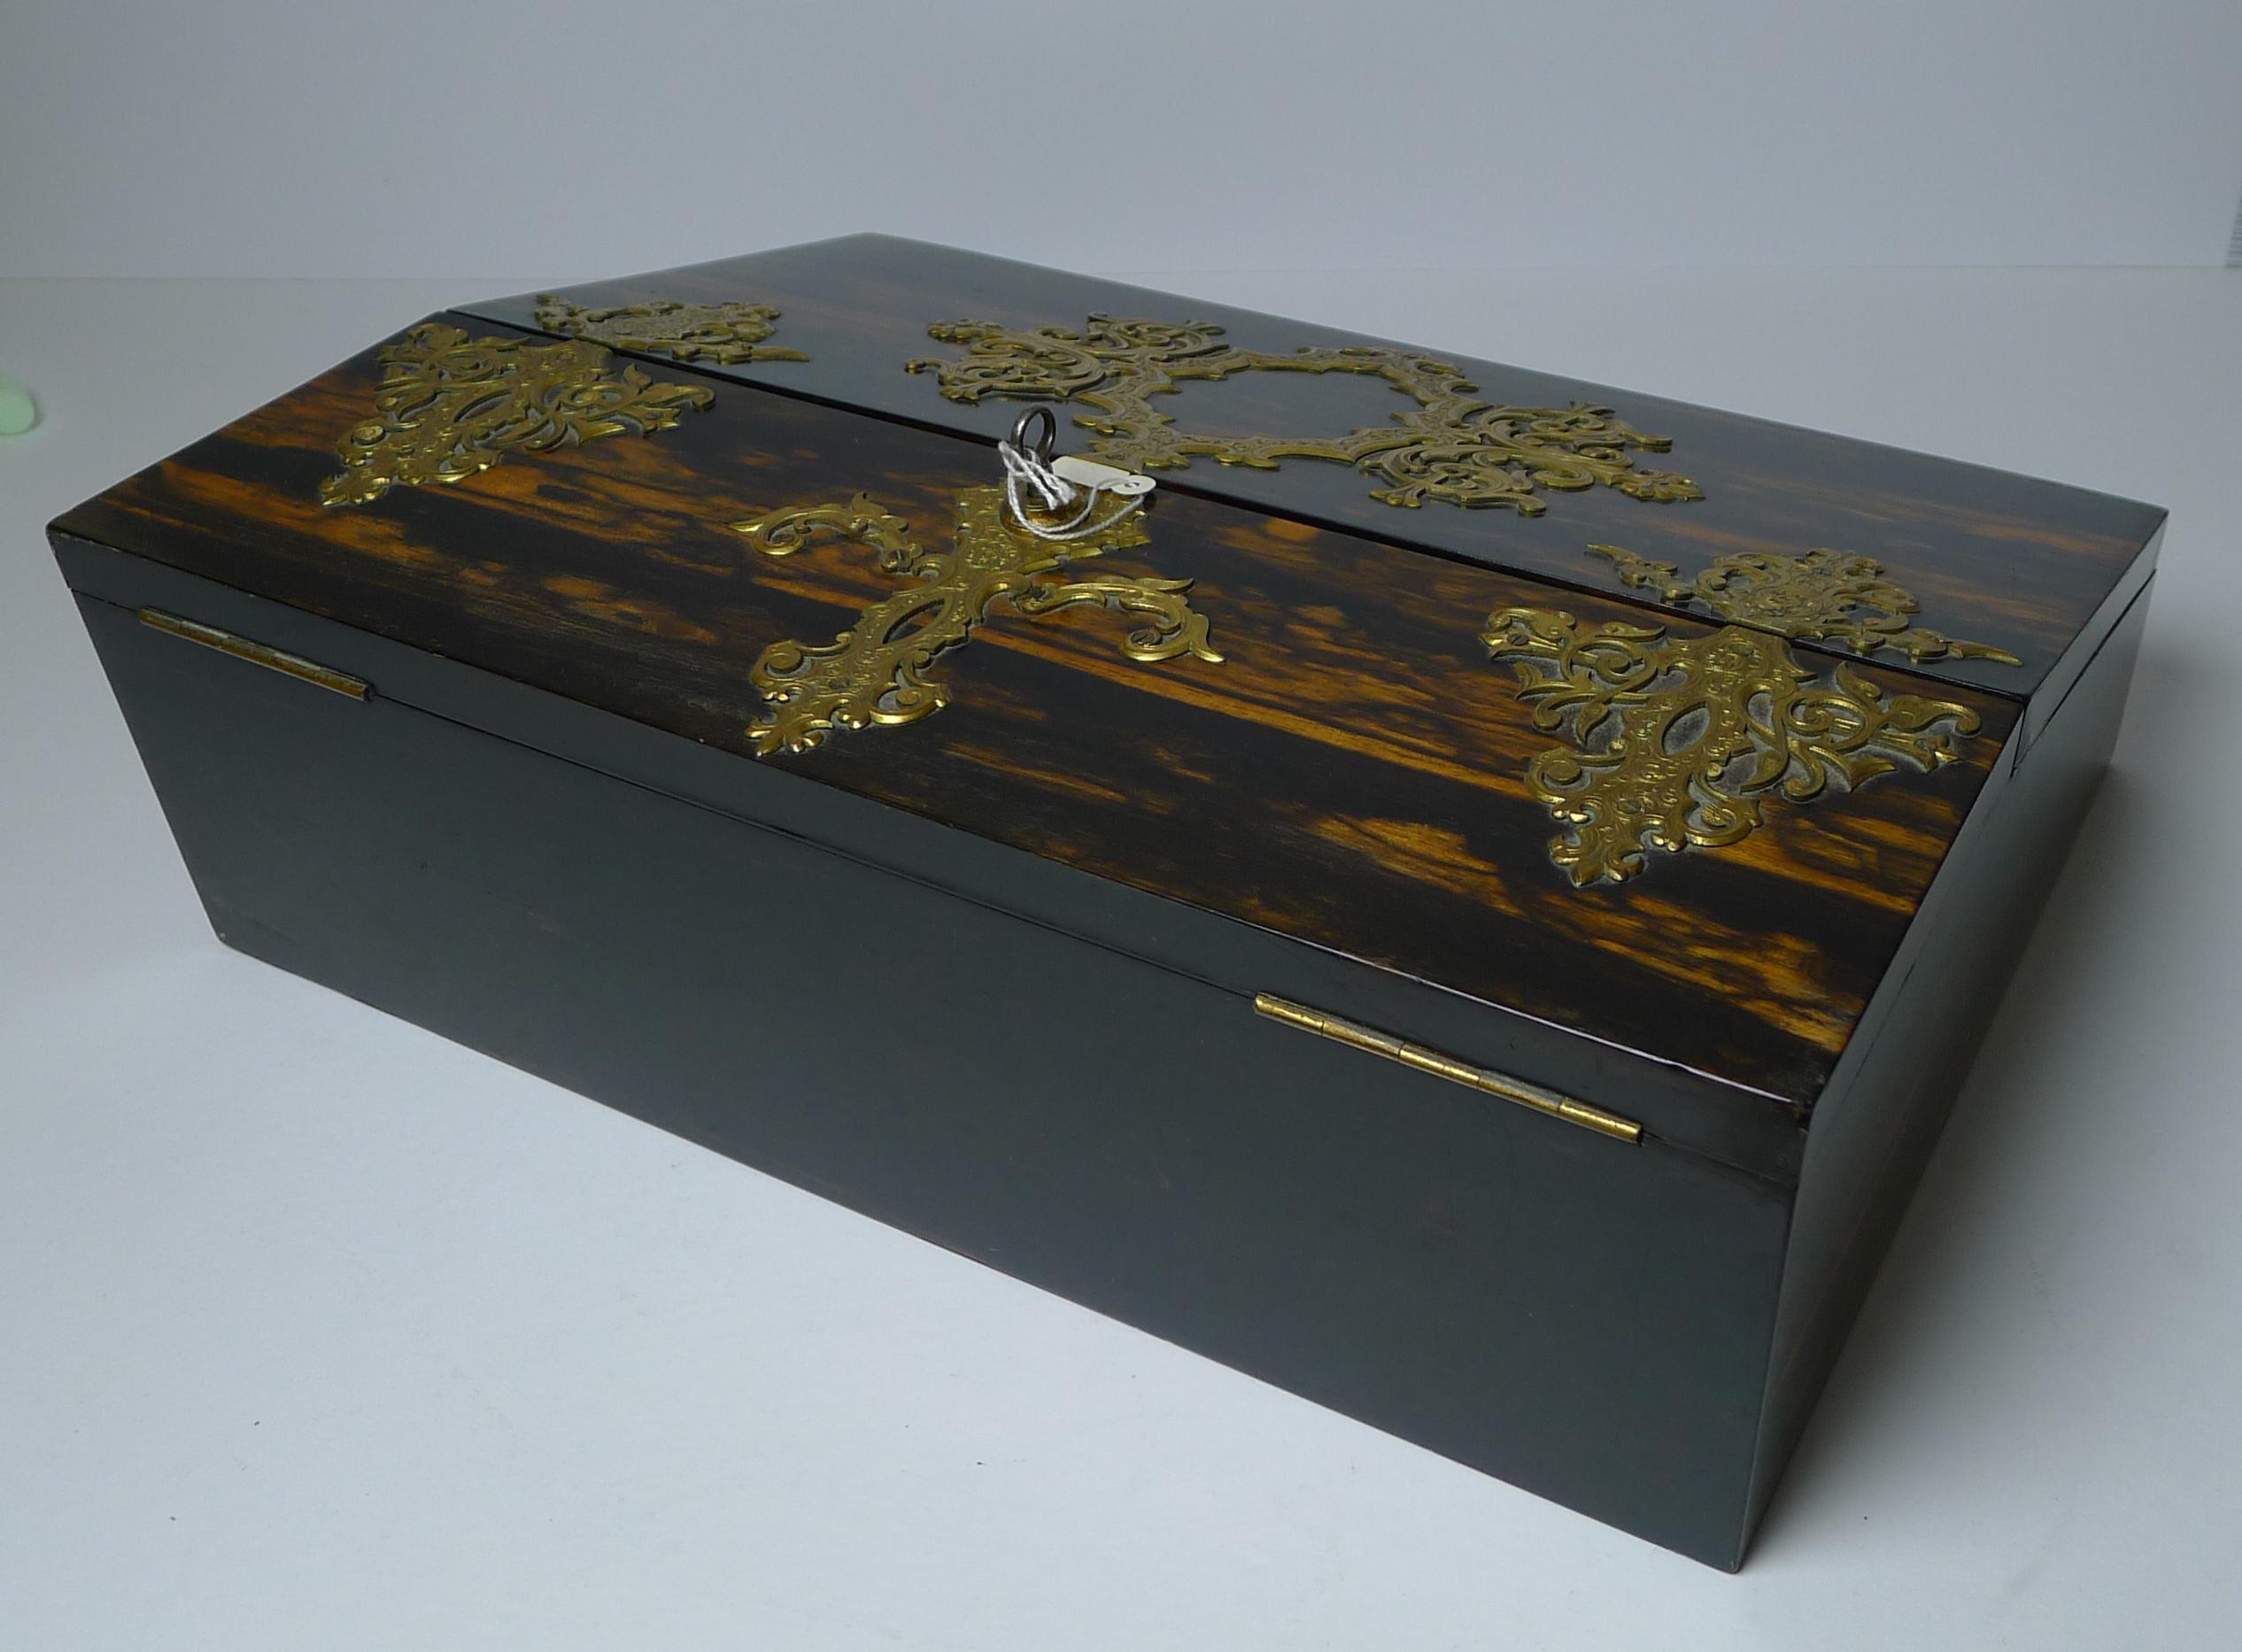 A superb quality Victorian writing box / slope in exotic and dramatic Coromandel wood mounted with the most exquisite gilded bronze mounts, all intricately engraved with top-notch screwed mounting.

The box comes complete with the original working